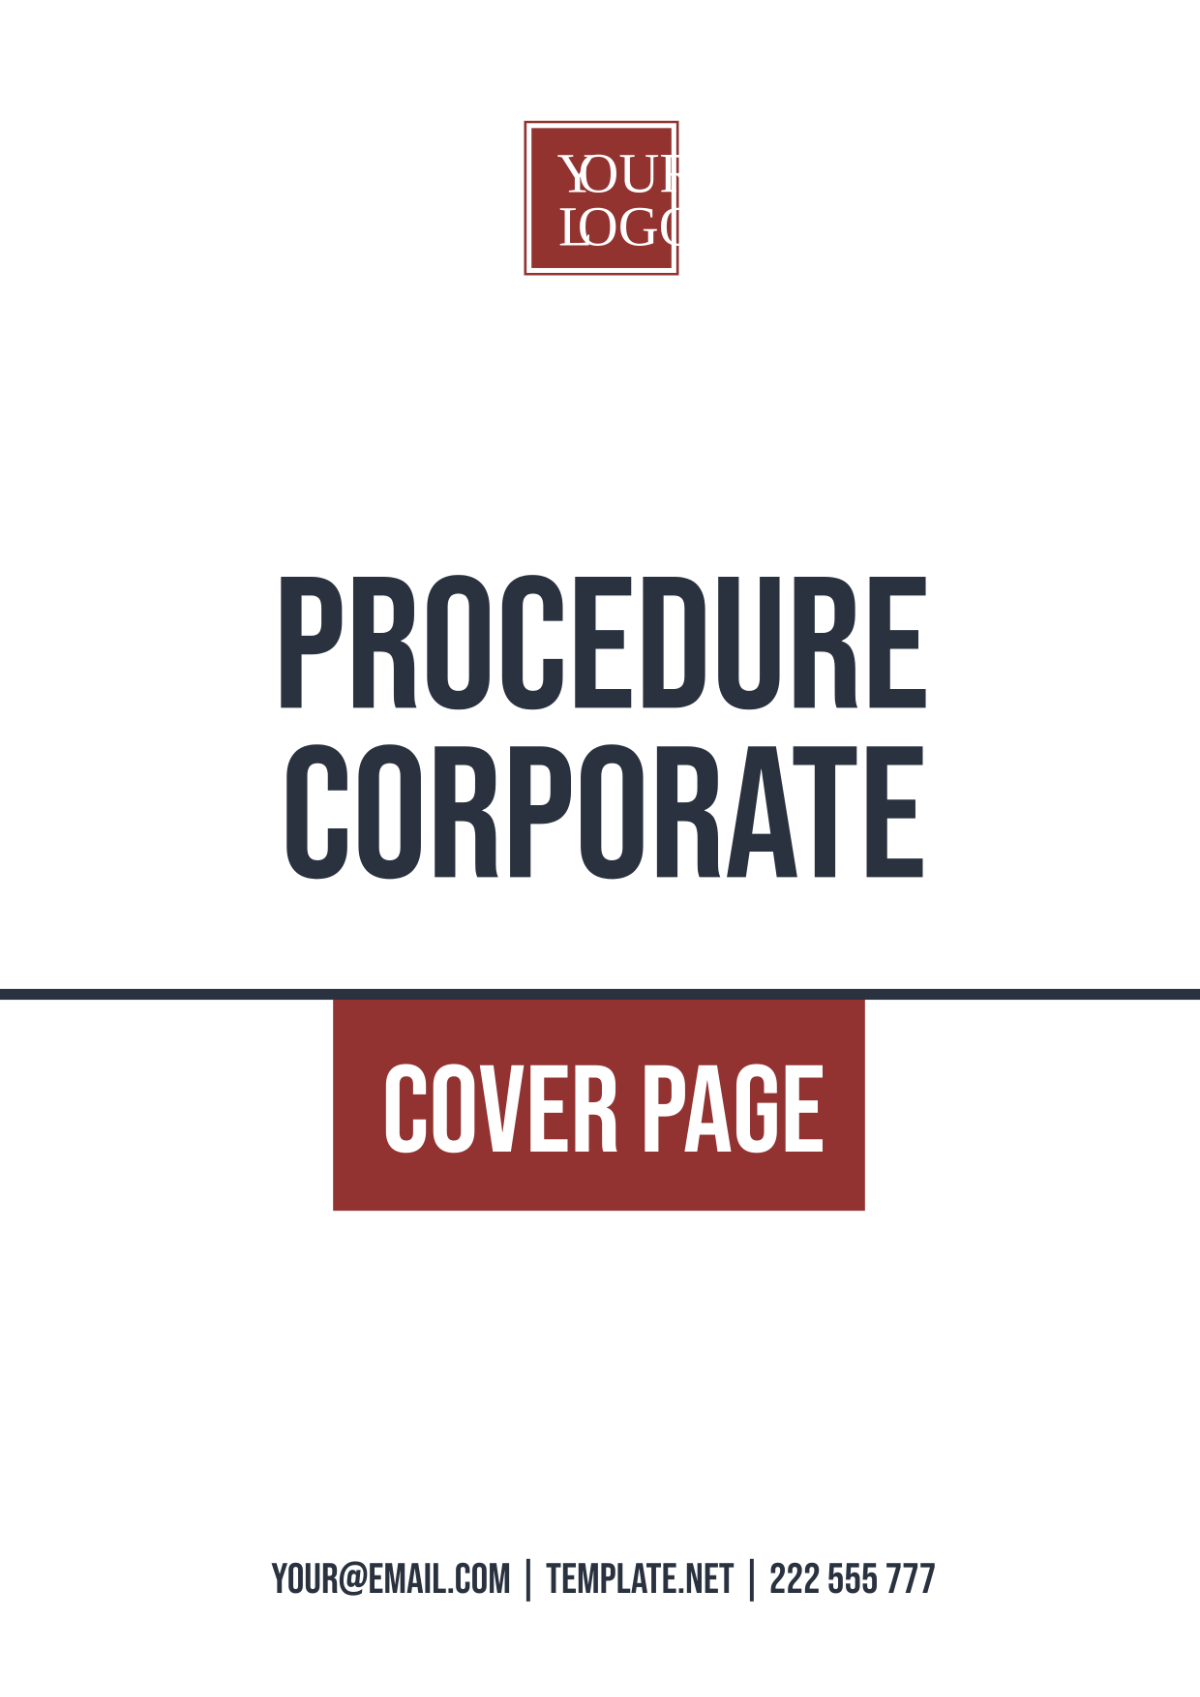 Procedure Corporate Cover Page Template